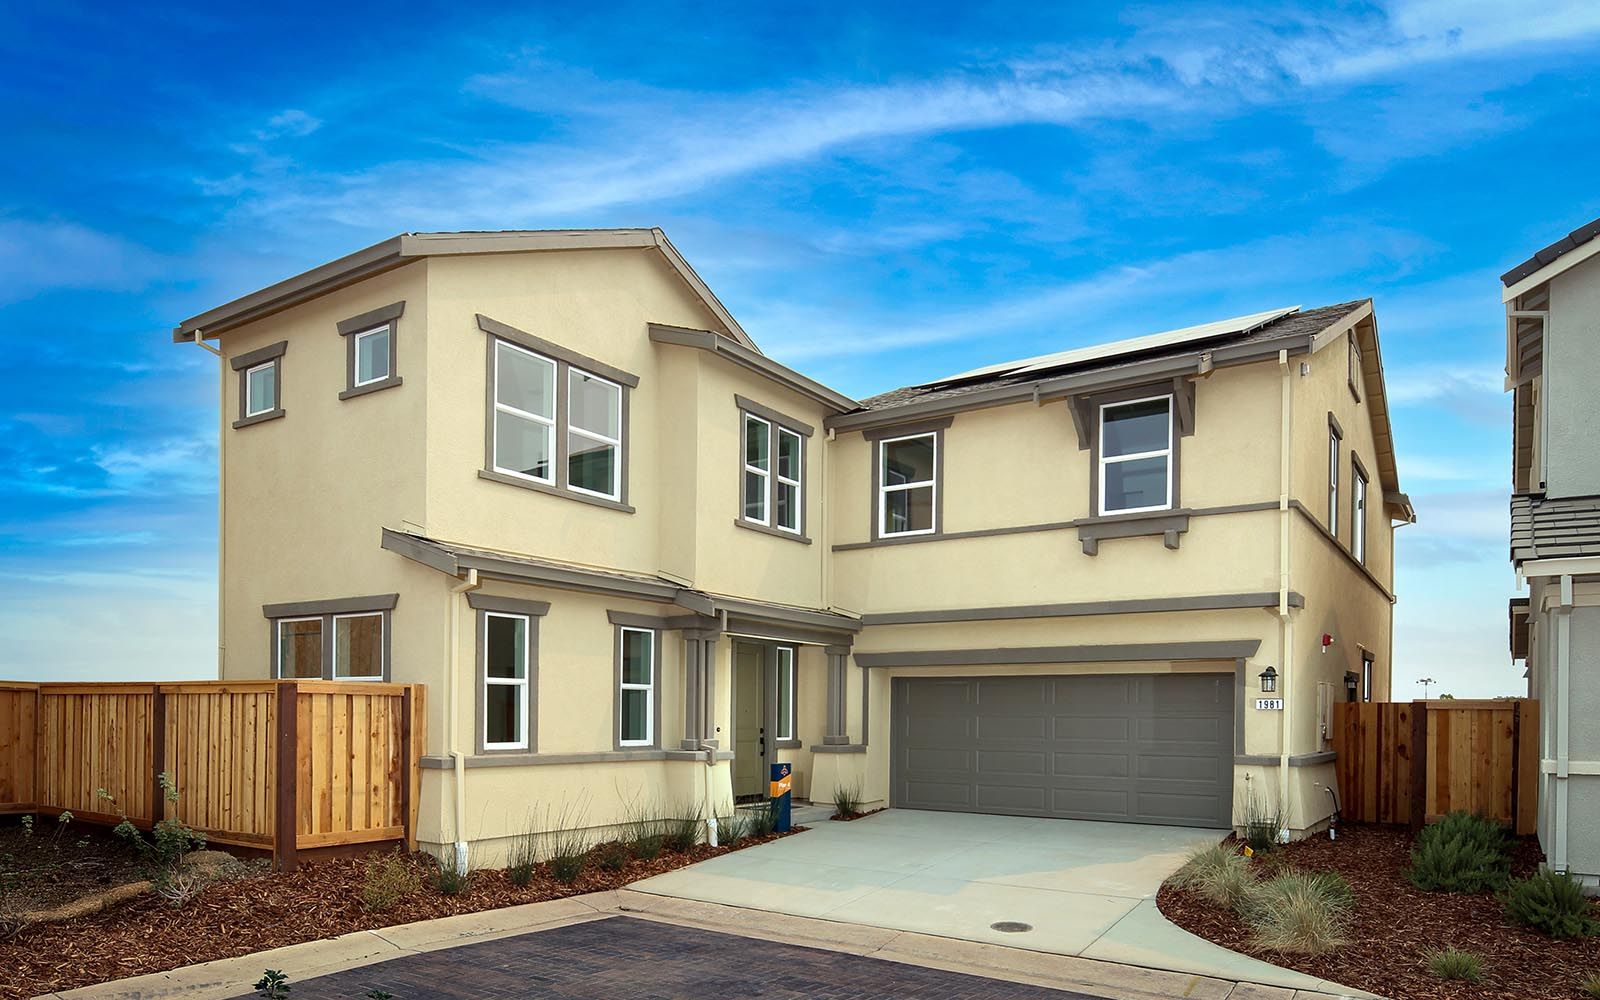 Residence 4 Model at Chandler in Brentwood:All the best things will happen right here at Chandler. It will be a place that’s moment sparking, smile inducing, day making—a fresh opportunity